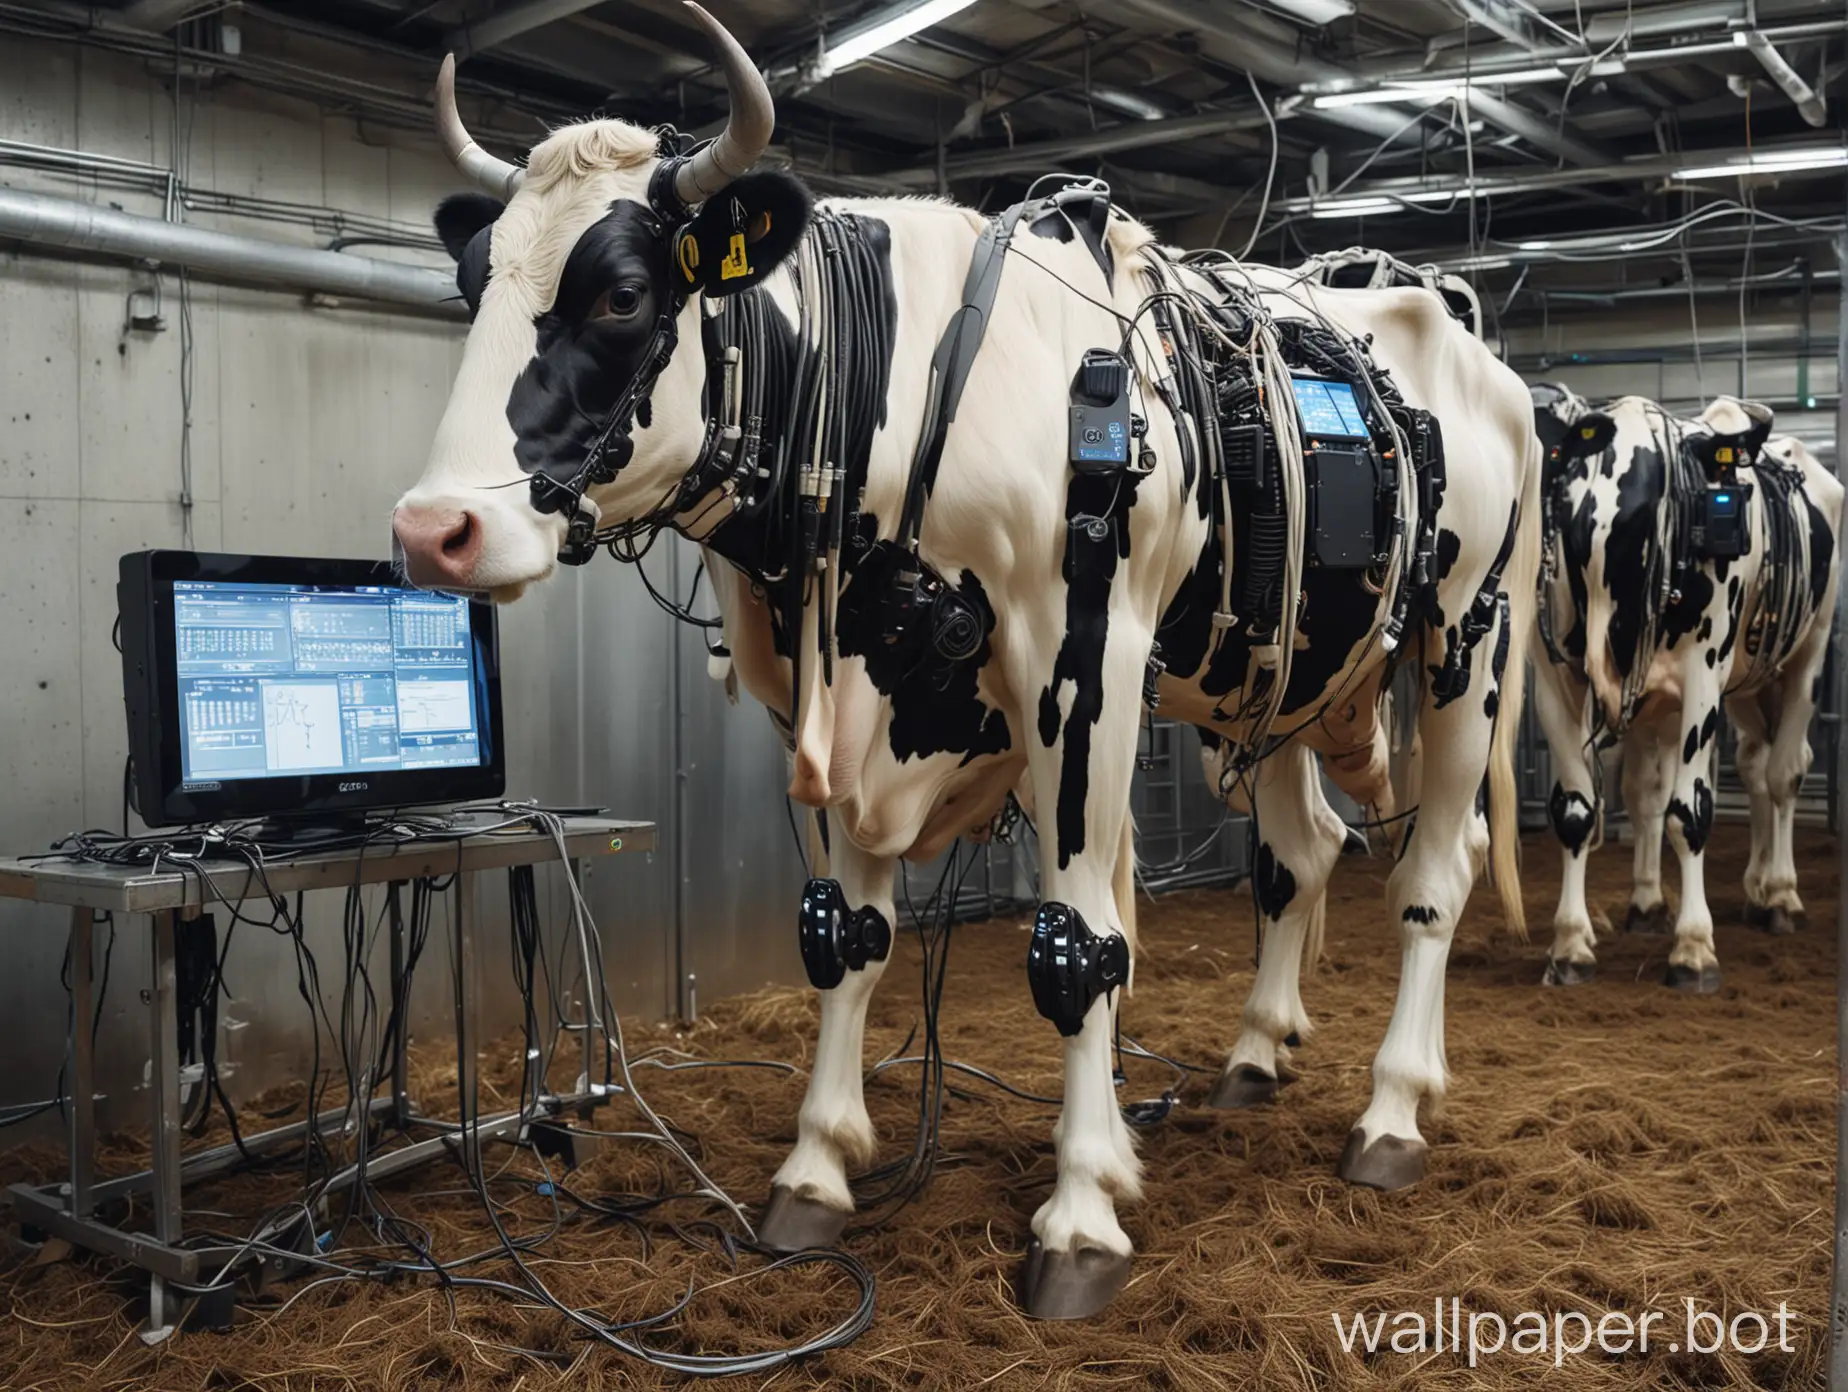 Dark Bionic Robot Cows, with embedded computer screens, lots of cables, camera taking a picture of milk